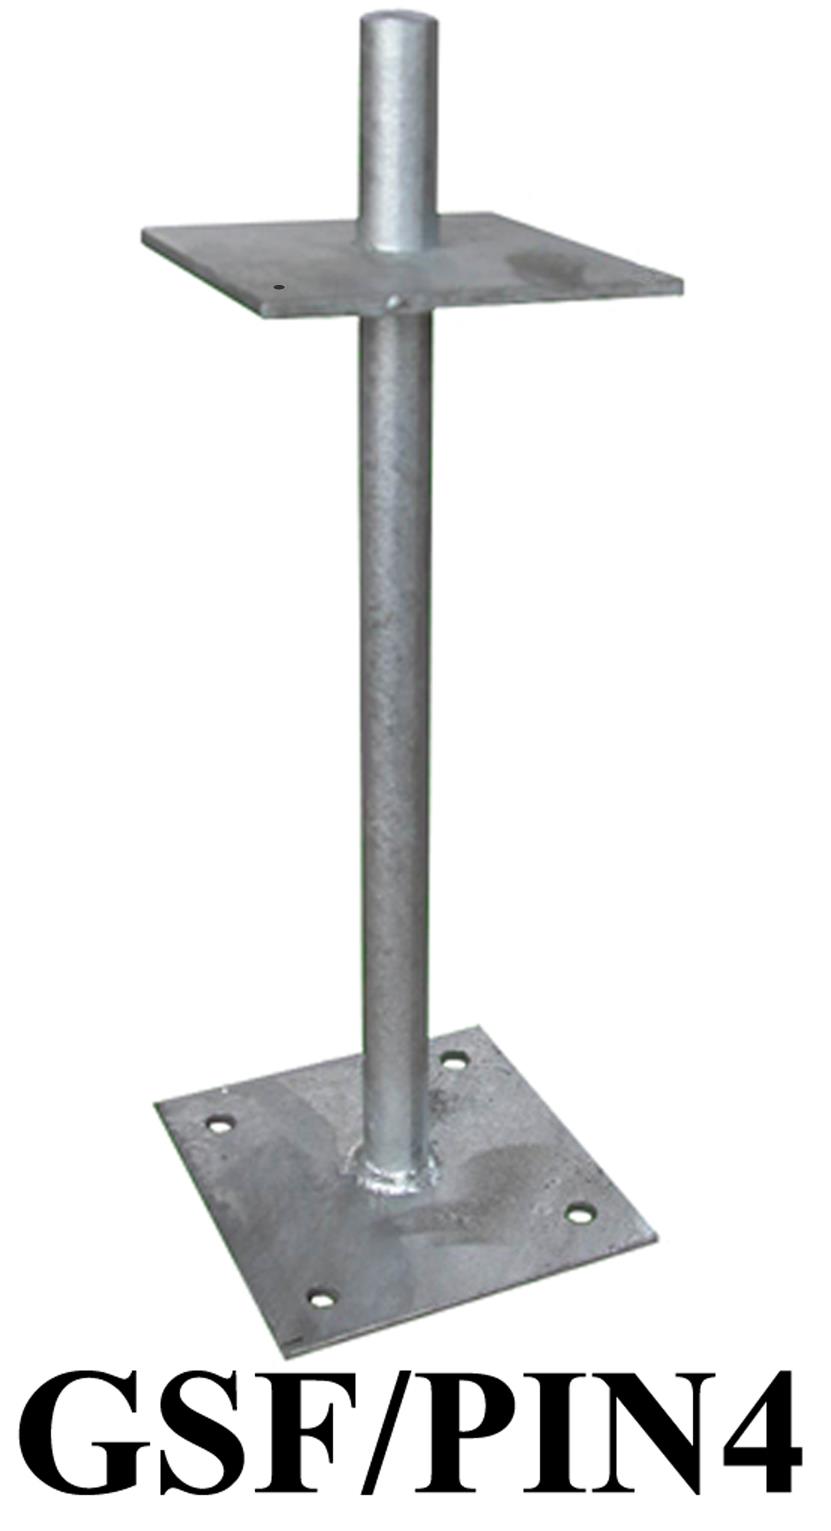 Galvanised Steel Flanged Pin 420mm high to recieve post size 150mm x 150mm or 200mm x 200mm GSF-PIN4